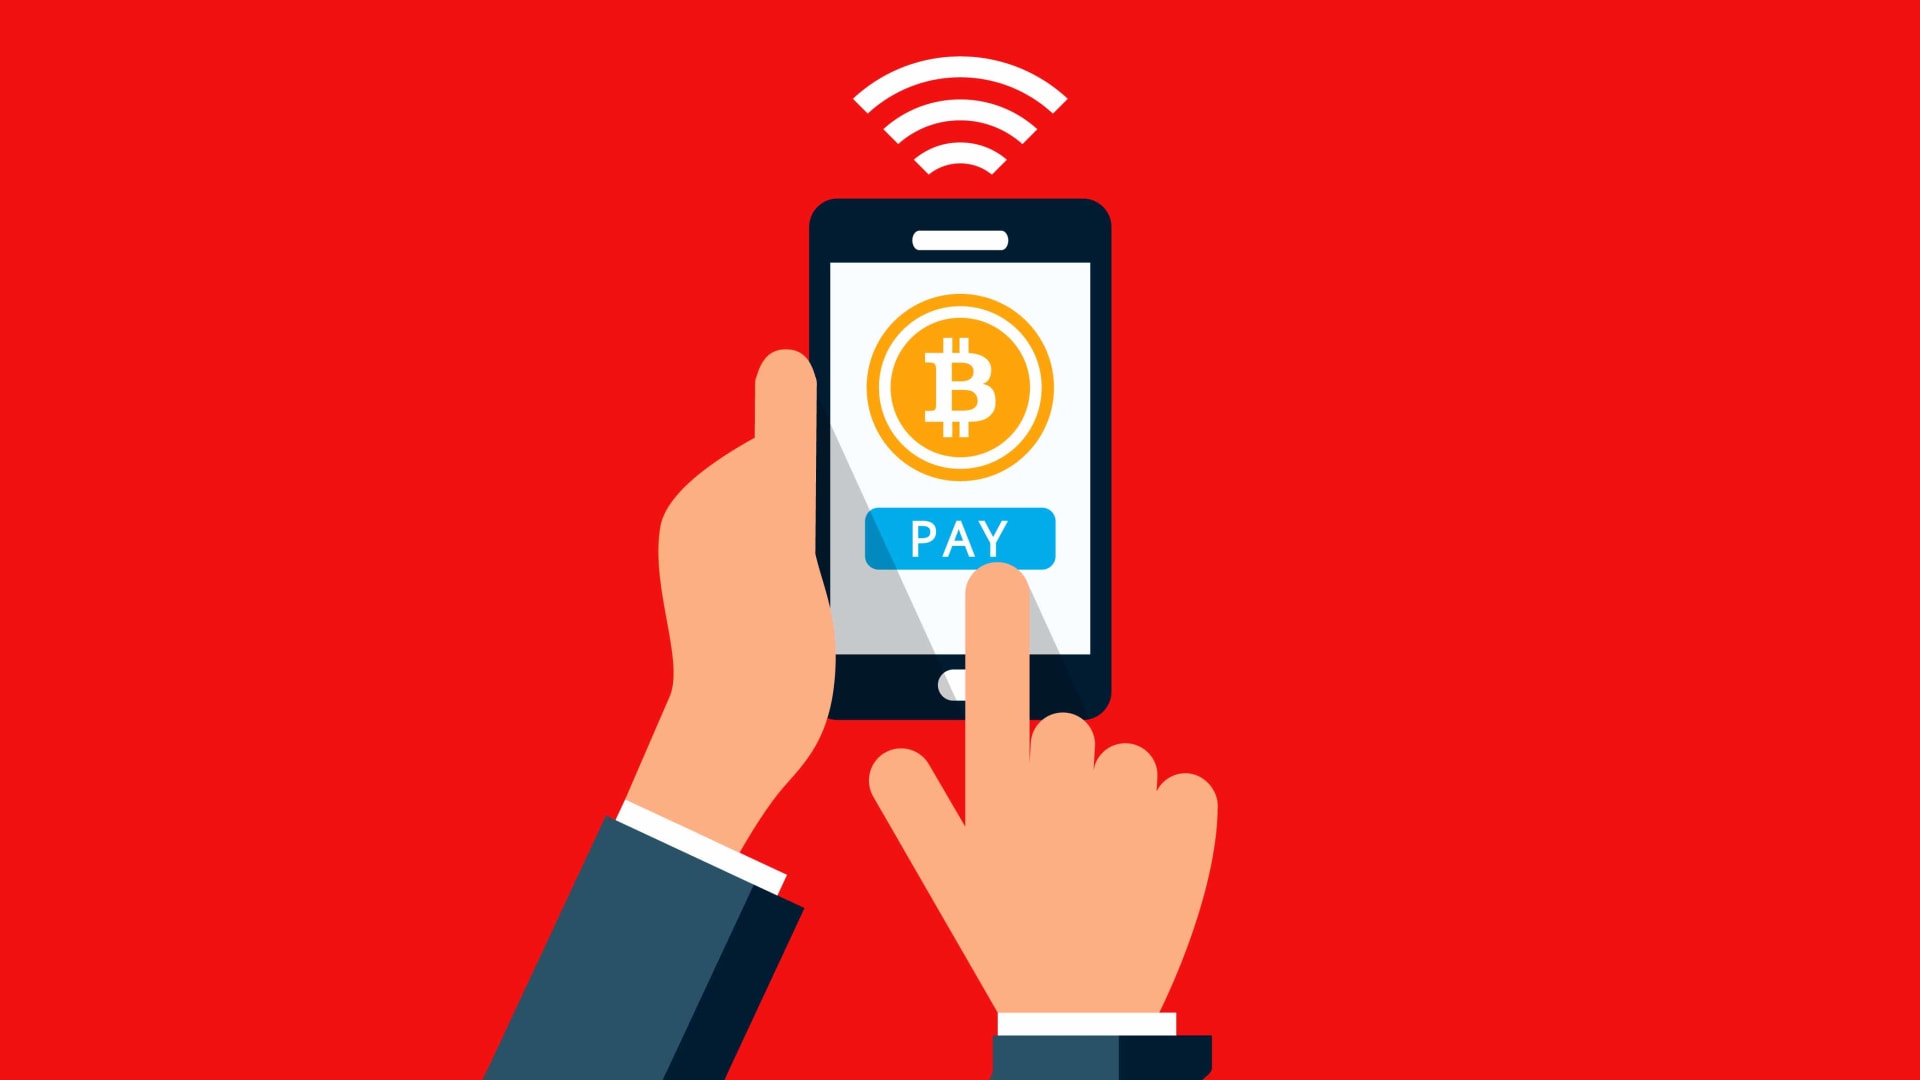 Visa survey: 25% of small businesses want to start accepting cryptocurrency payments.